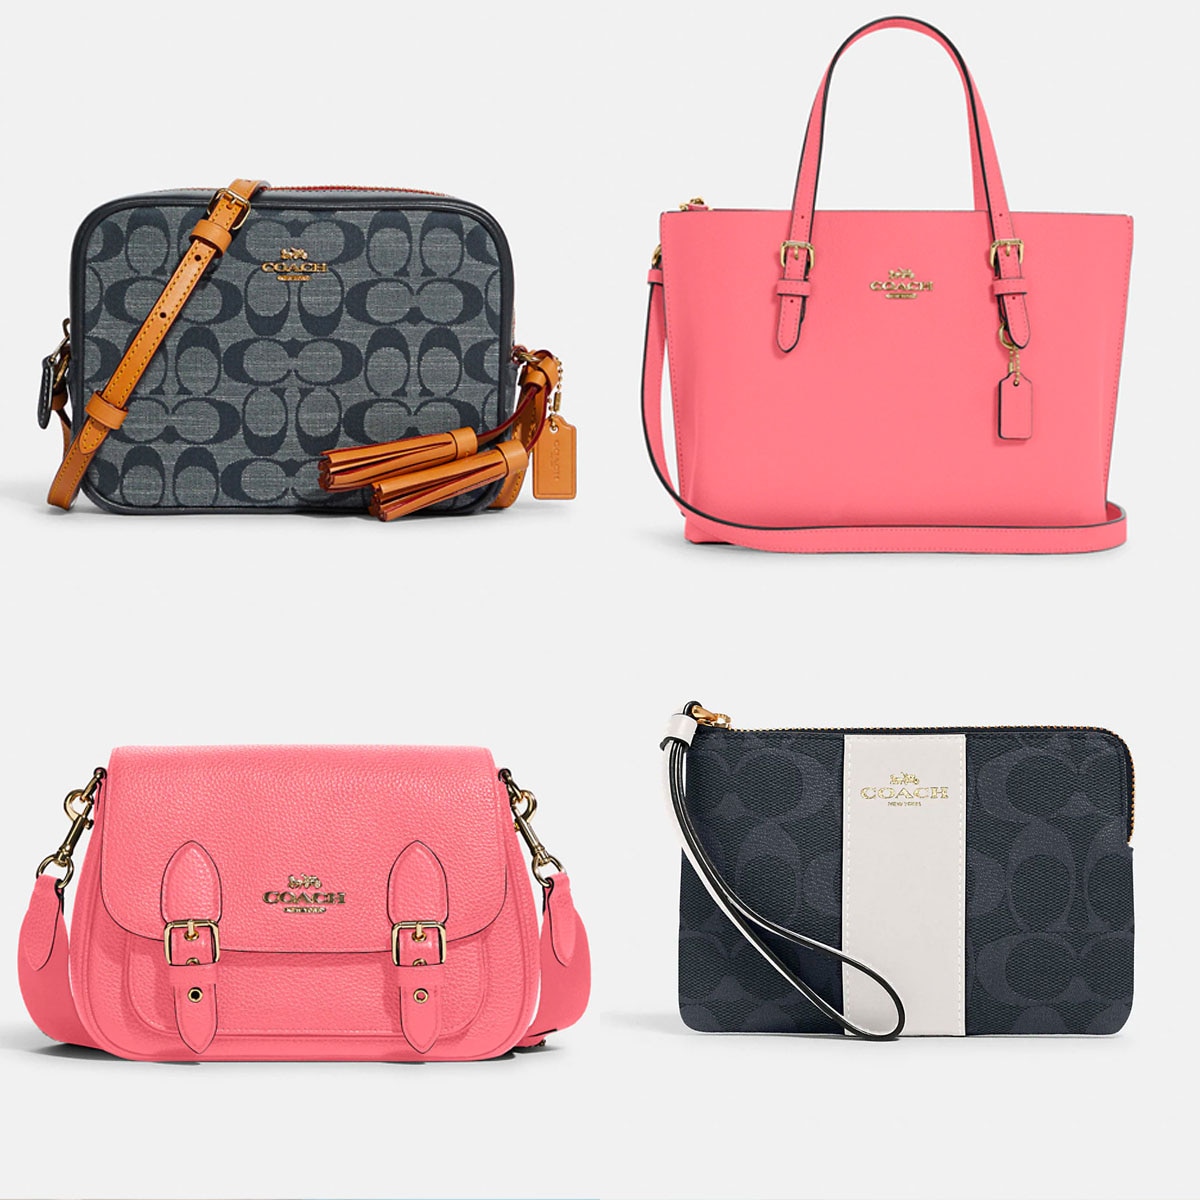 10 best Coach bag styles to buy that are worth every penny